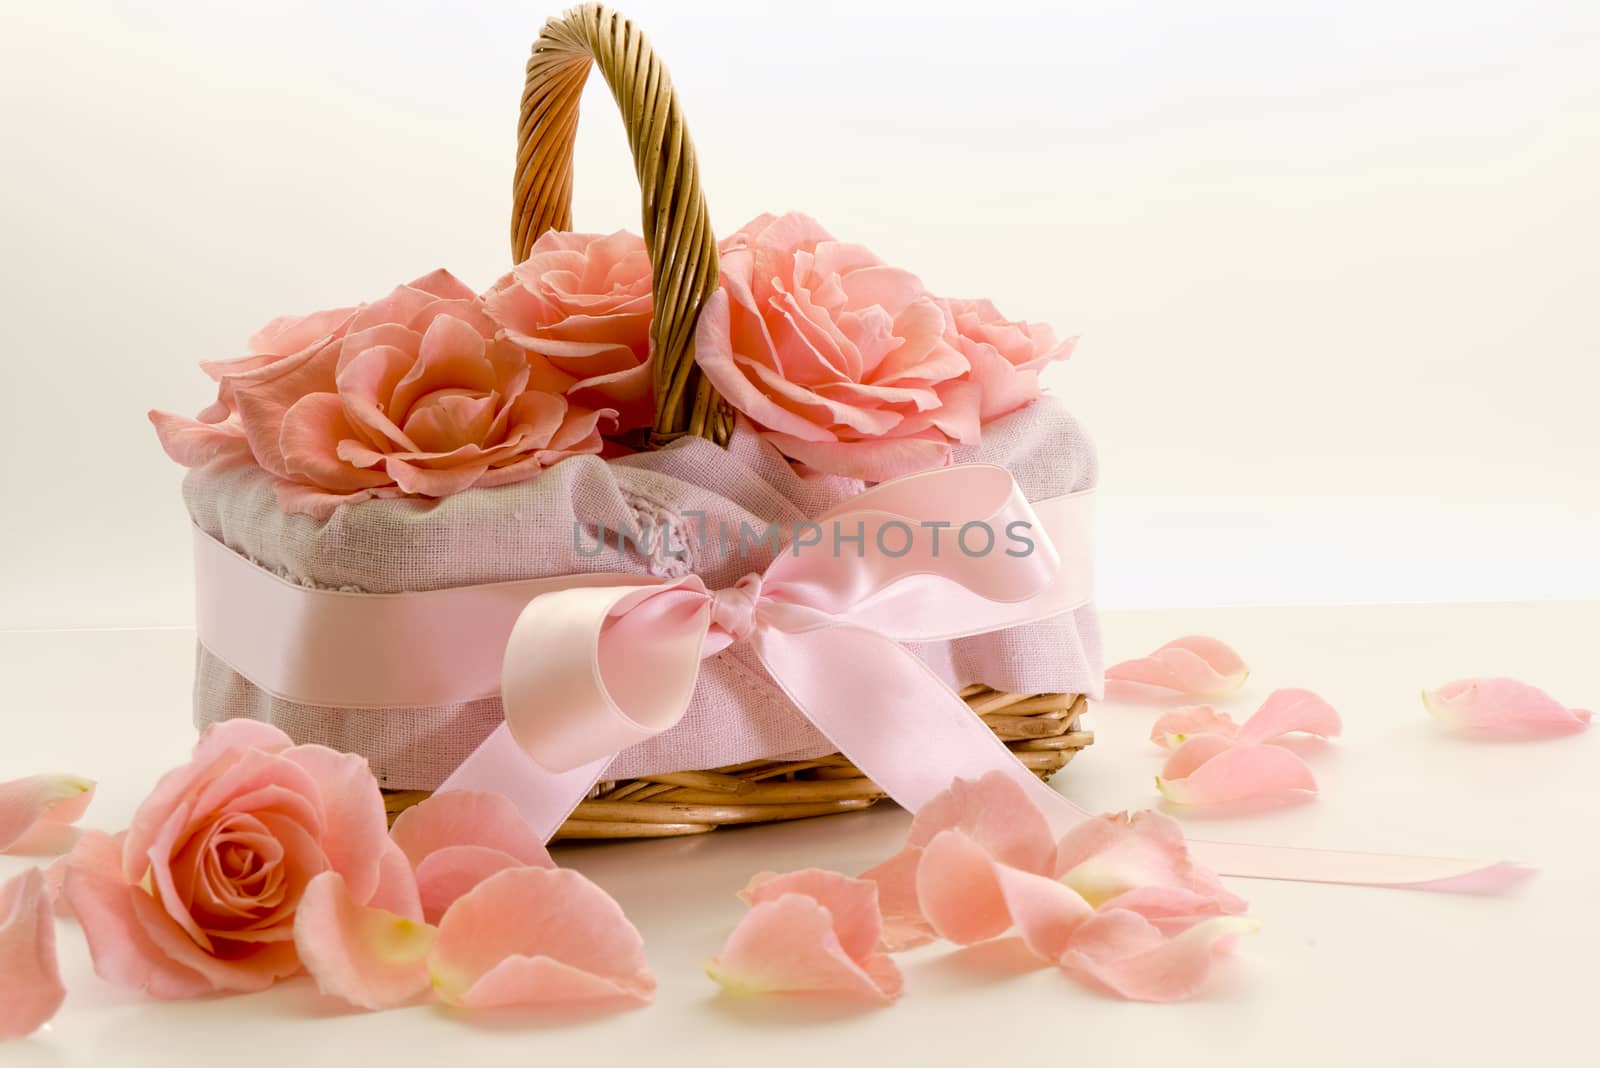 Roses in the basket with bow isolated on white background